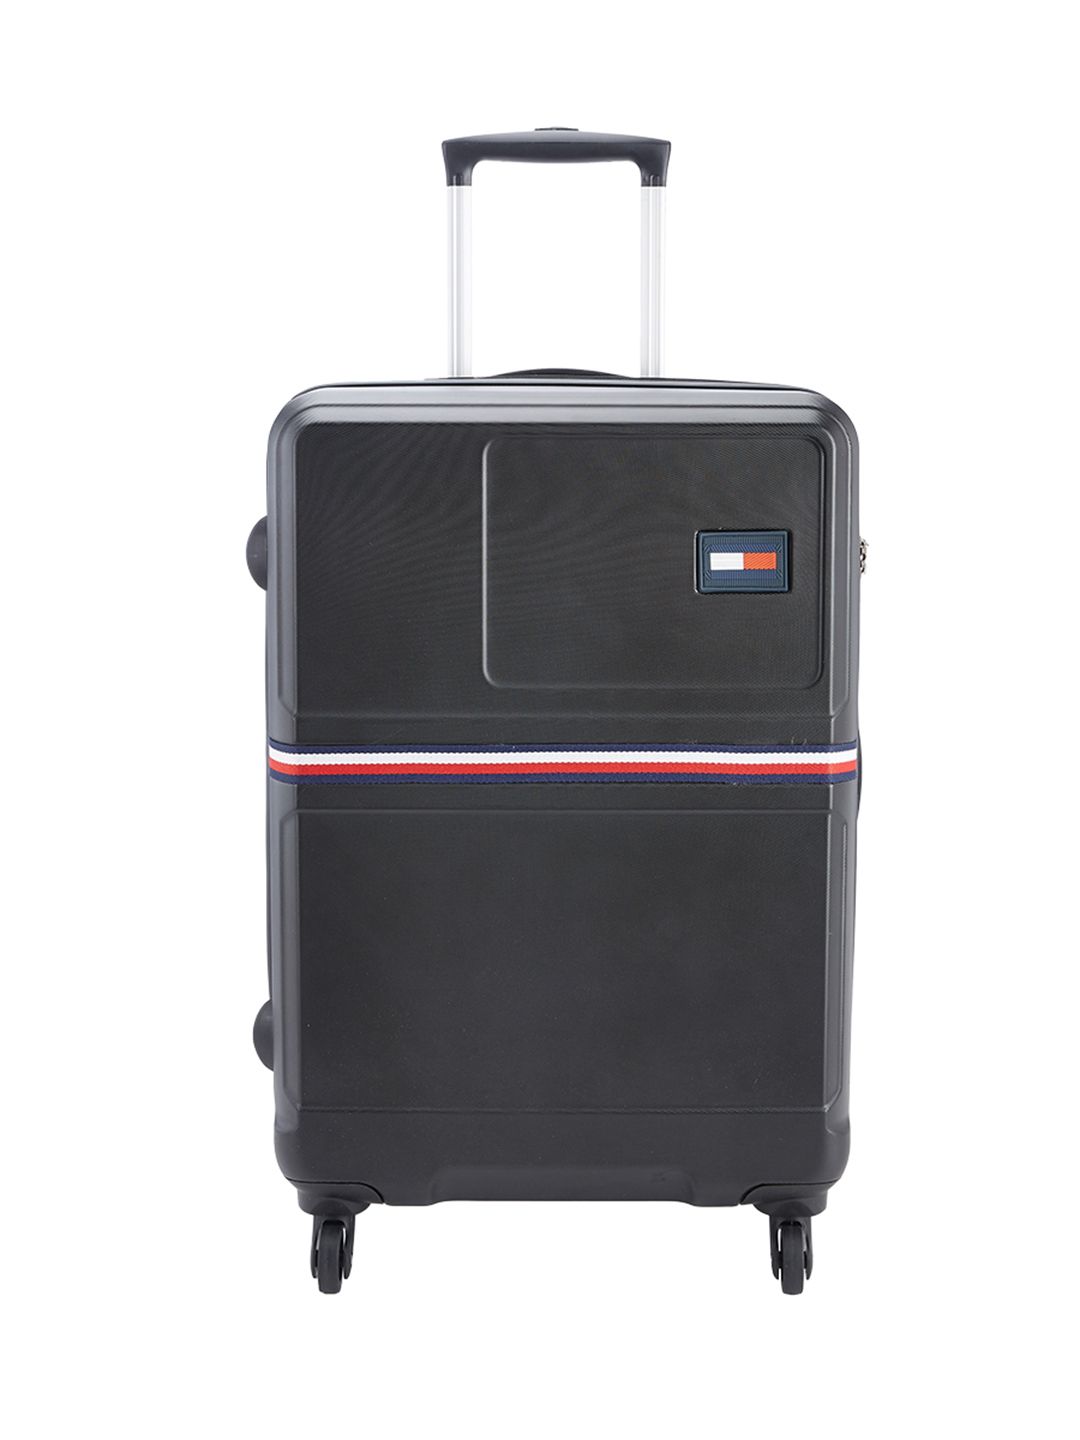 Tommy Hilfiger Black Solid 360 Degree Rotation 4 Wheels Medium Hard Trolley Suitcase Price in India